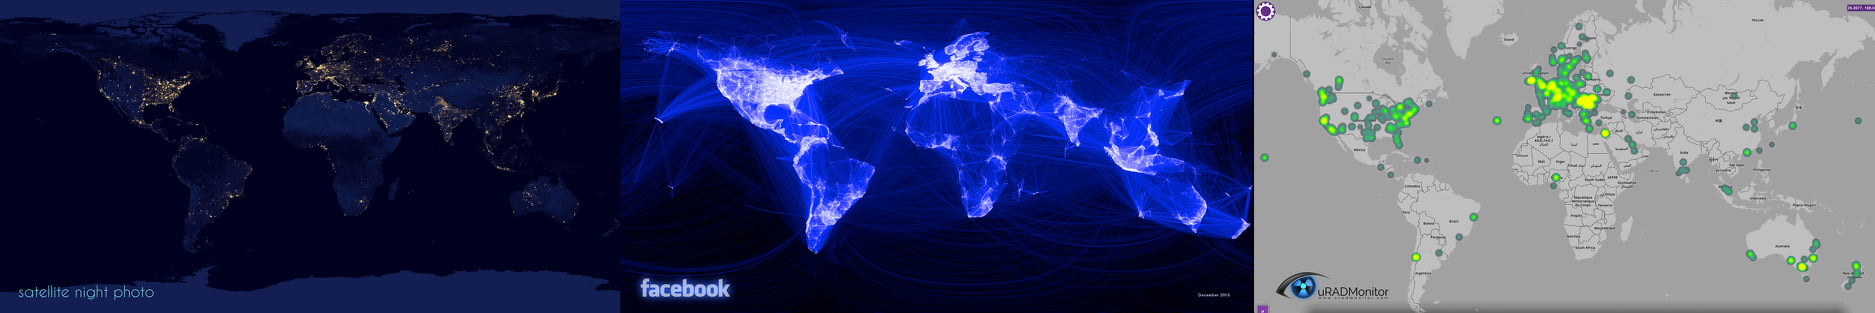 Identical spread of 3 global networks: Electricity, Facebook, uRADmonitor